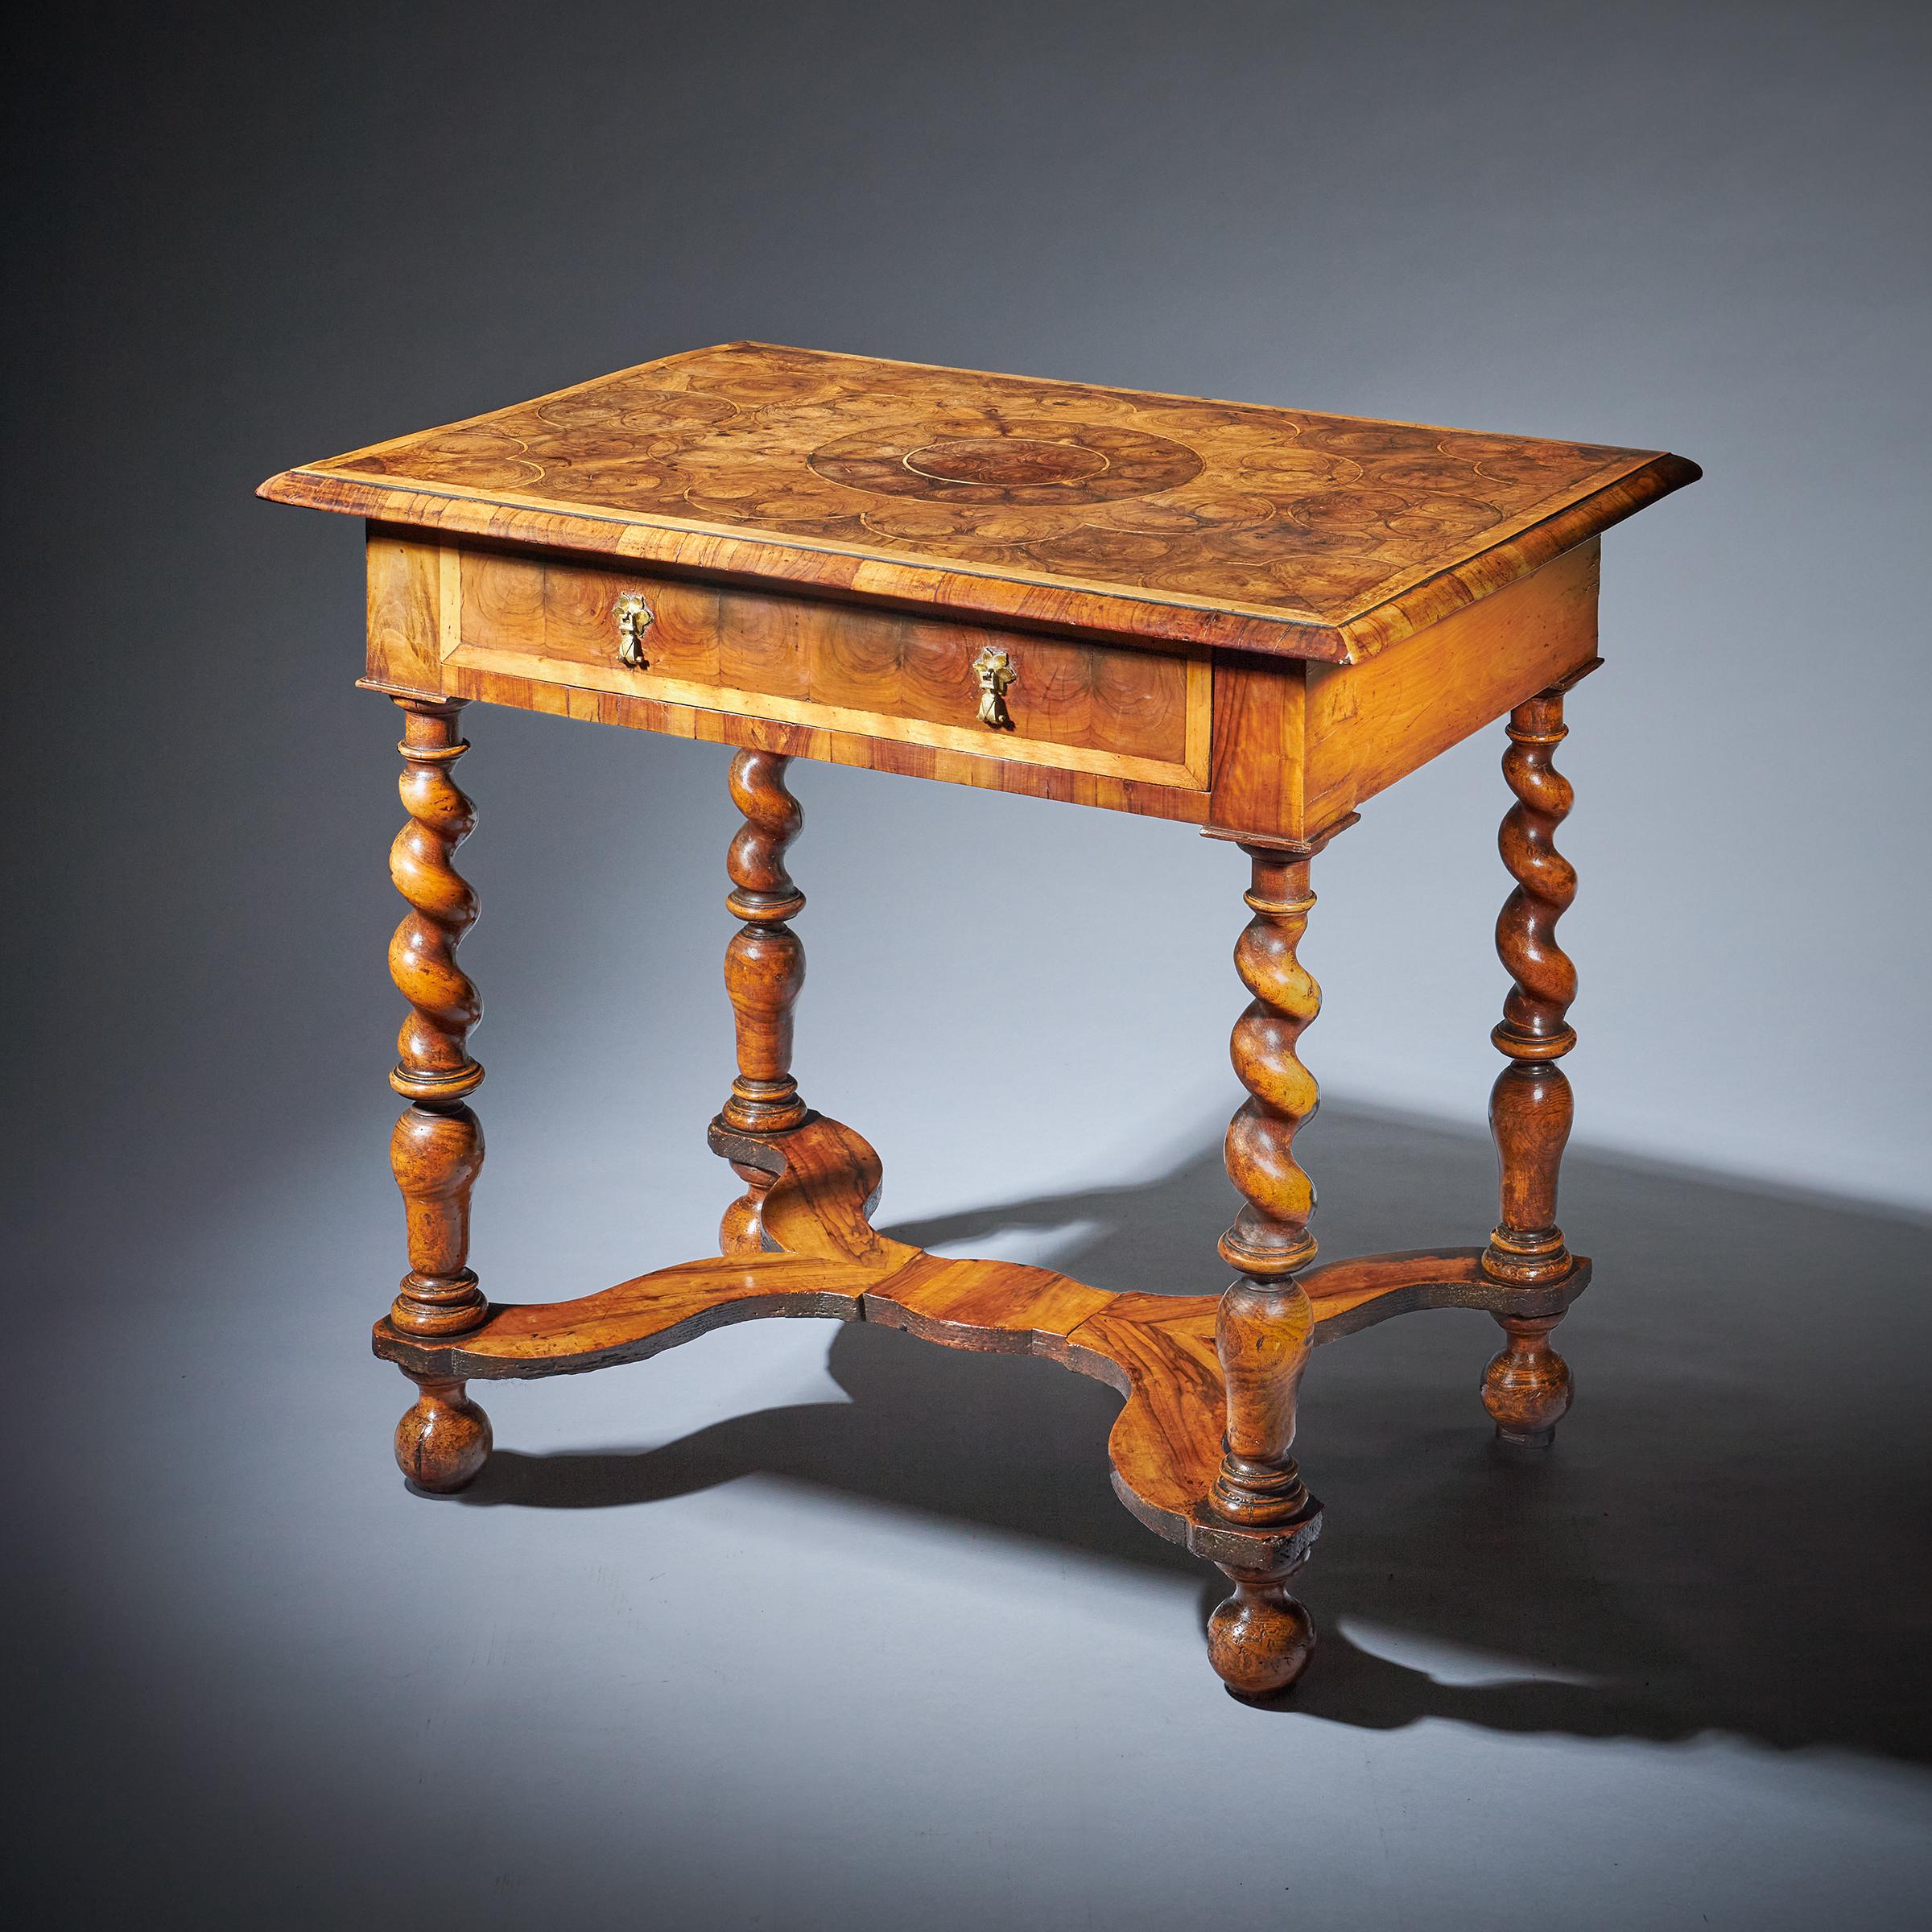 English 17th Century William and Mary Olive Oyster Table, Circa 1680-1700